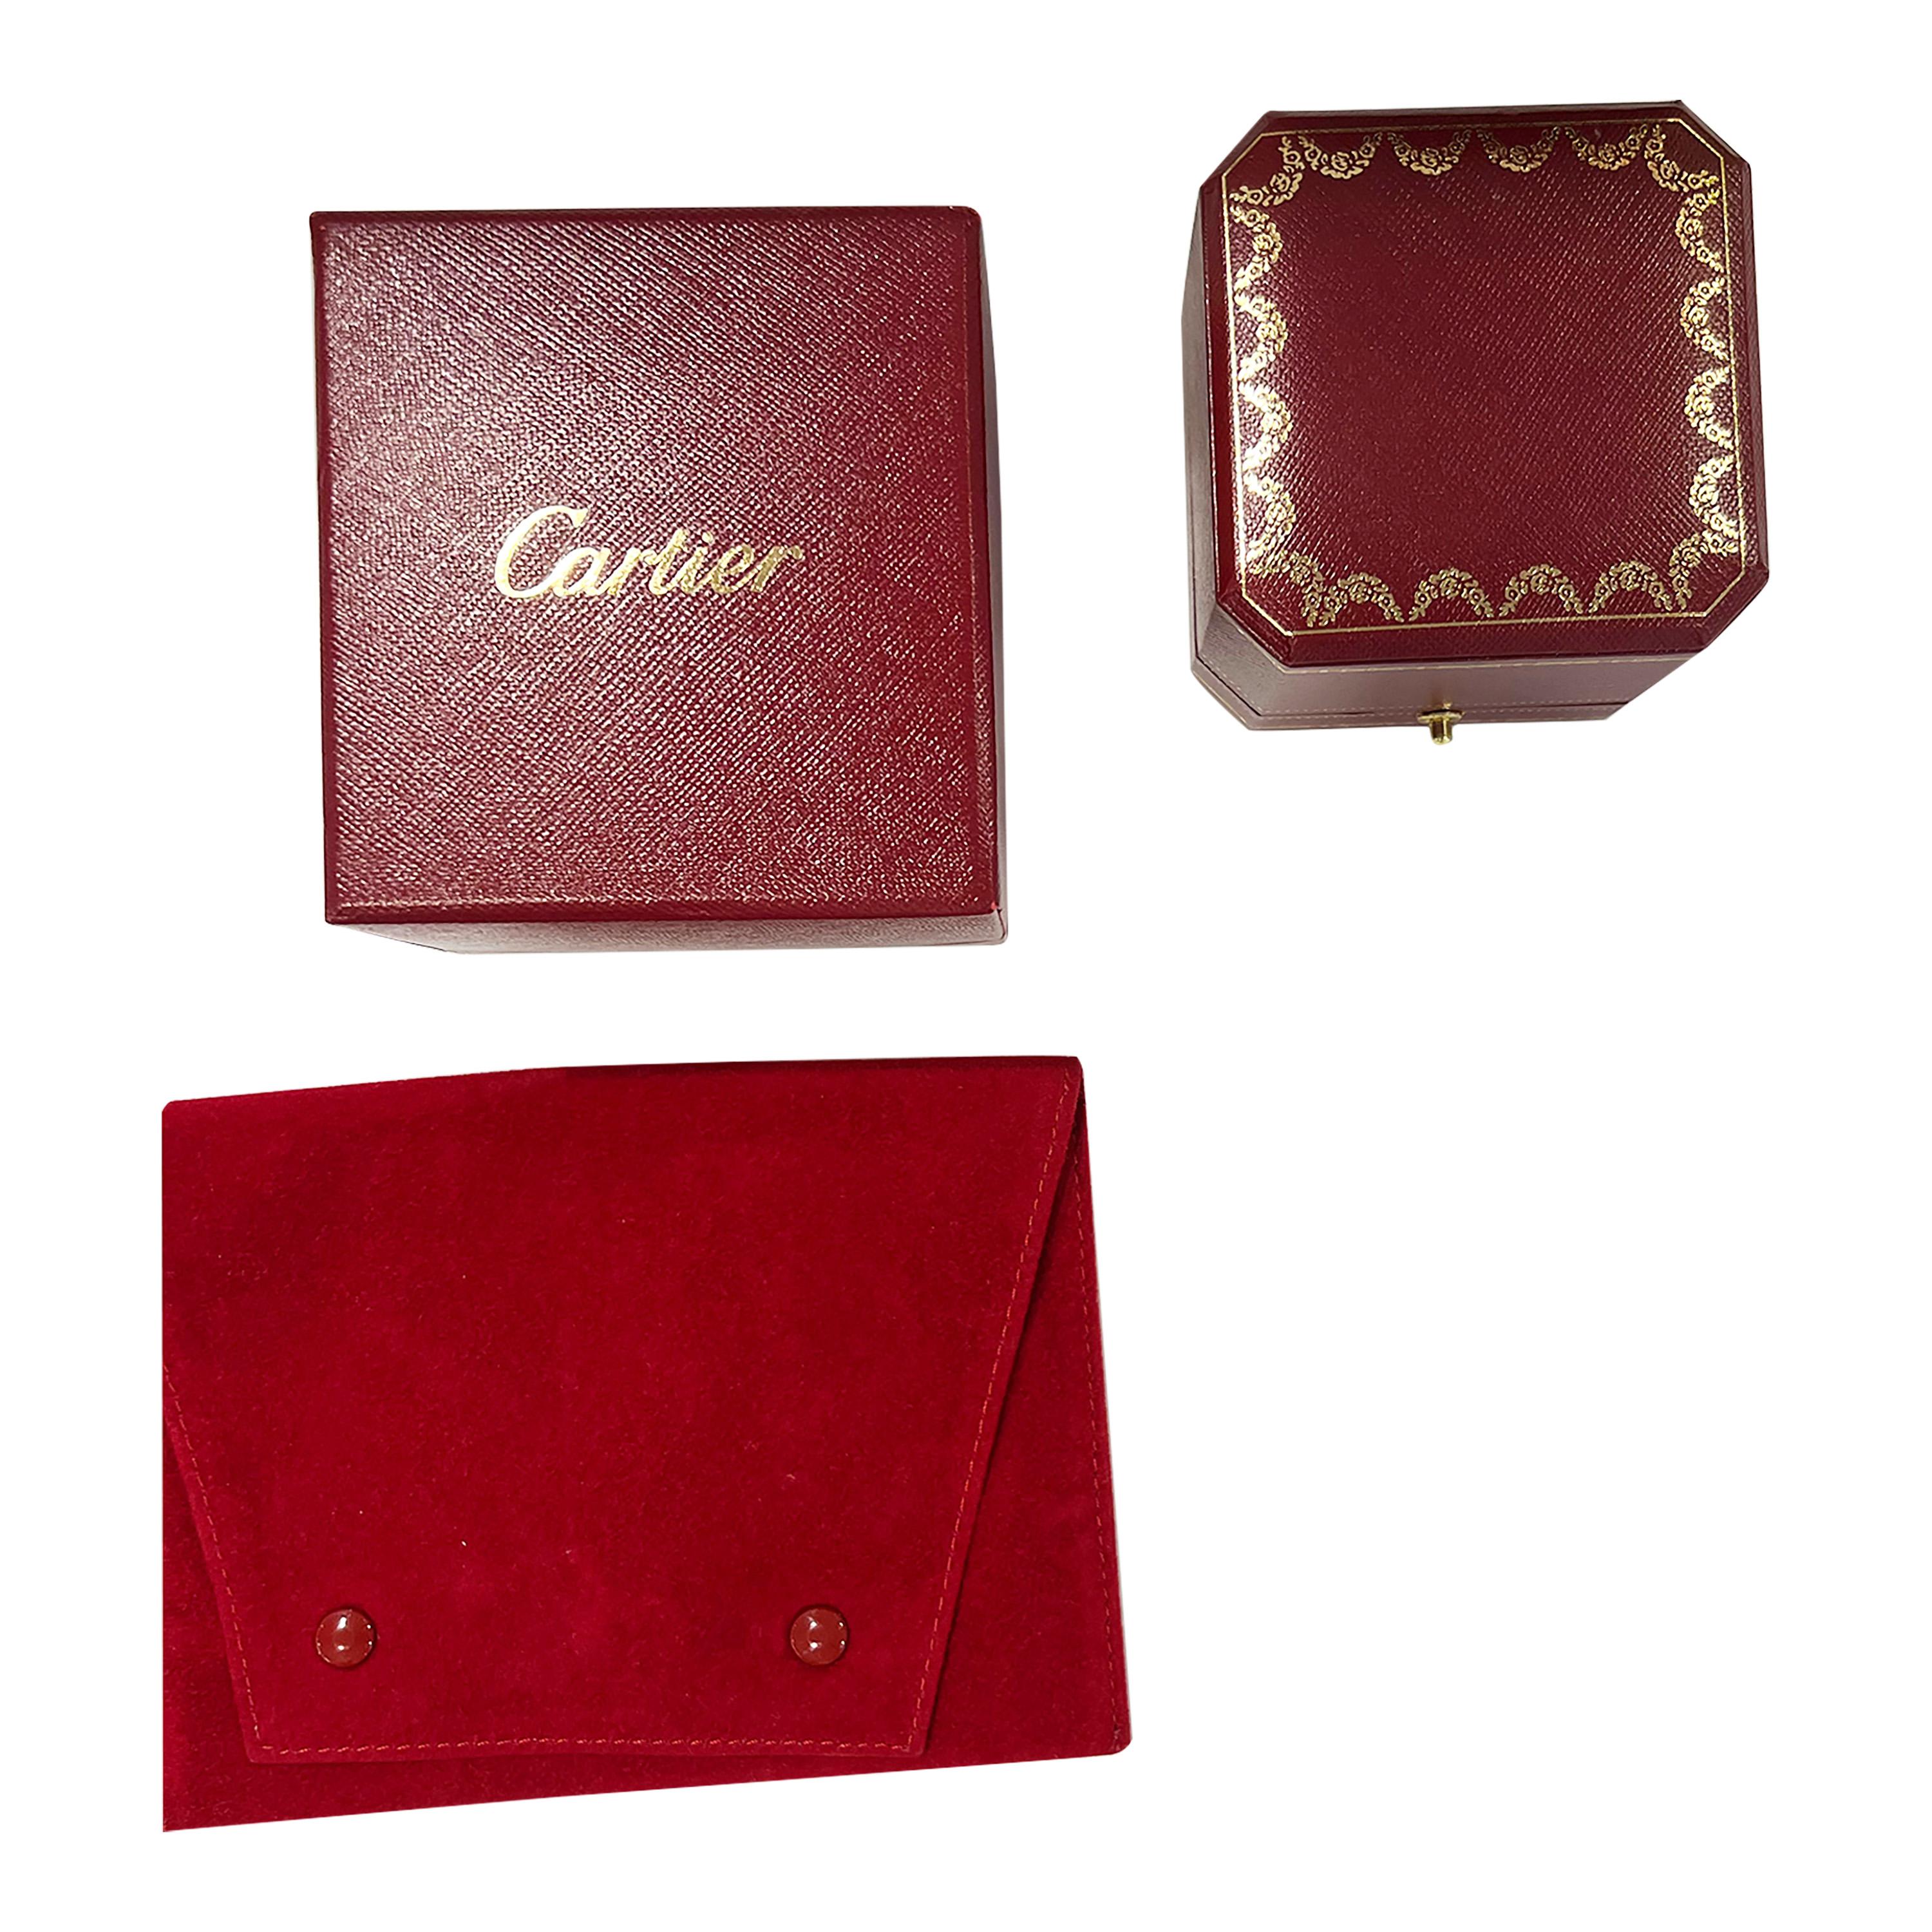 cartier ring 3 colors